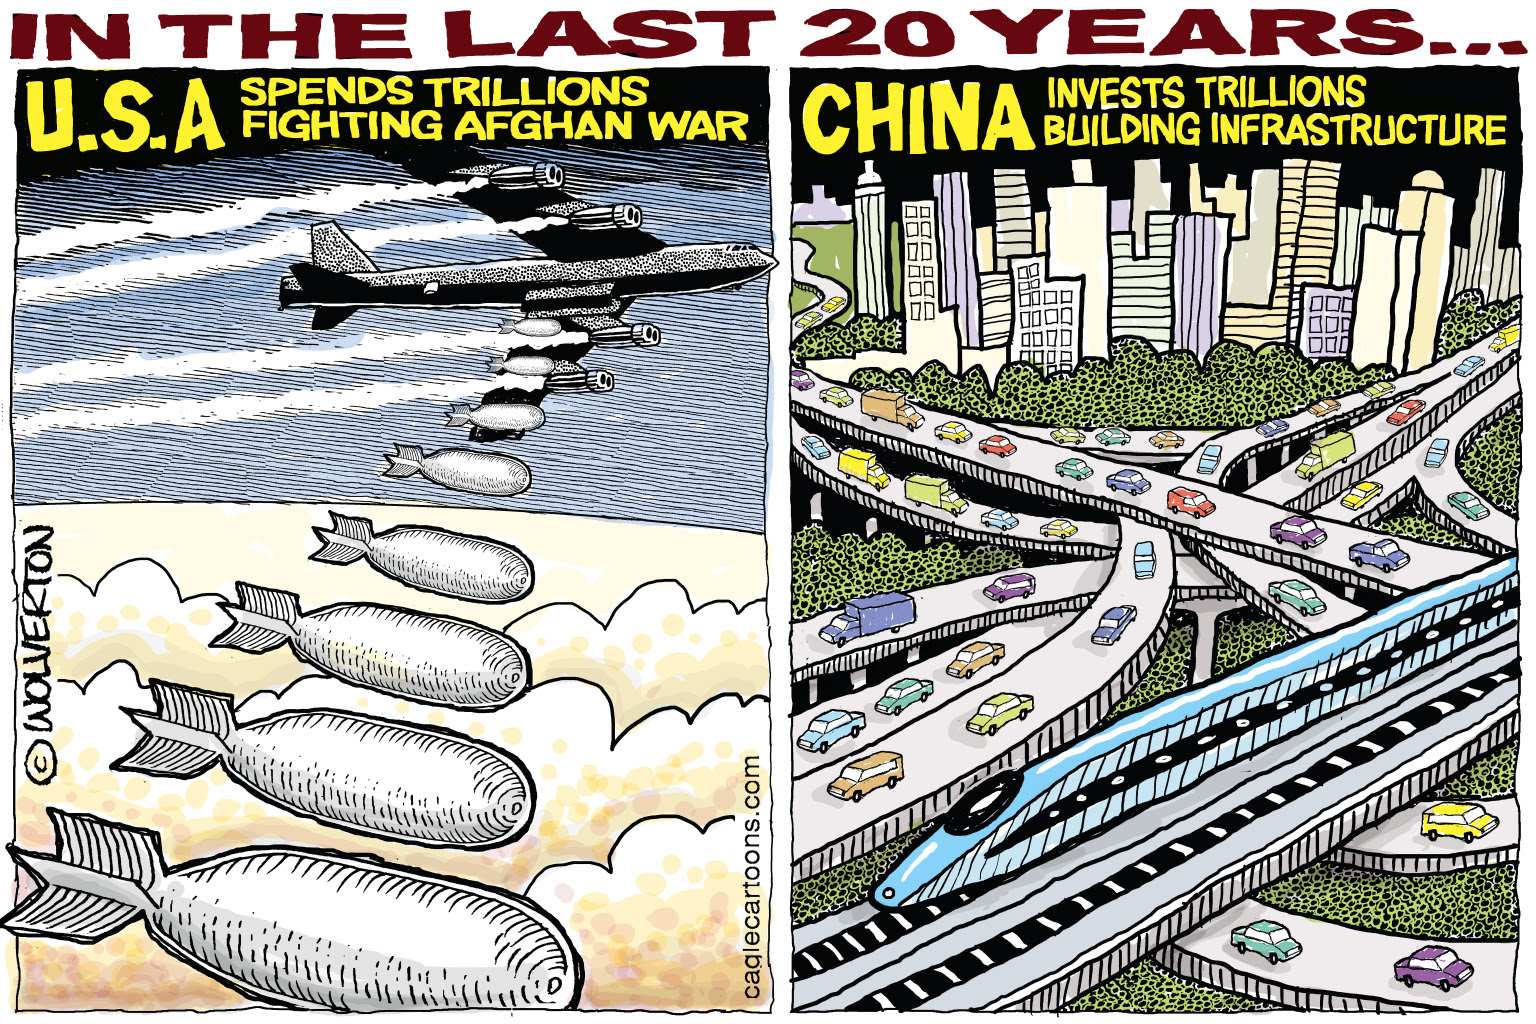 China invests in infrastructure. American invests in bombs.